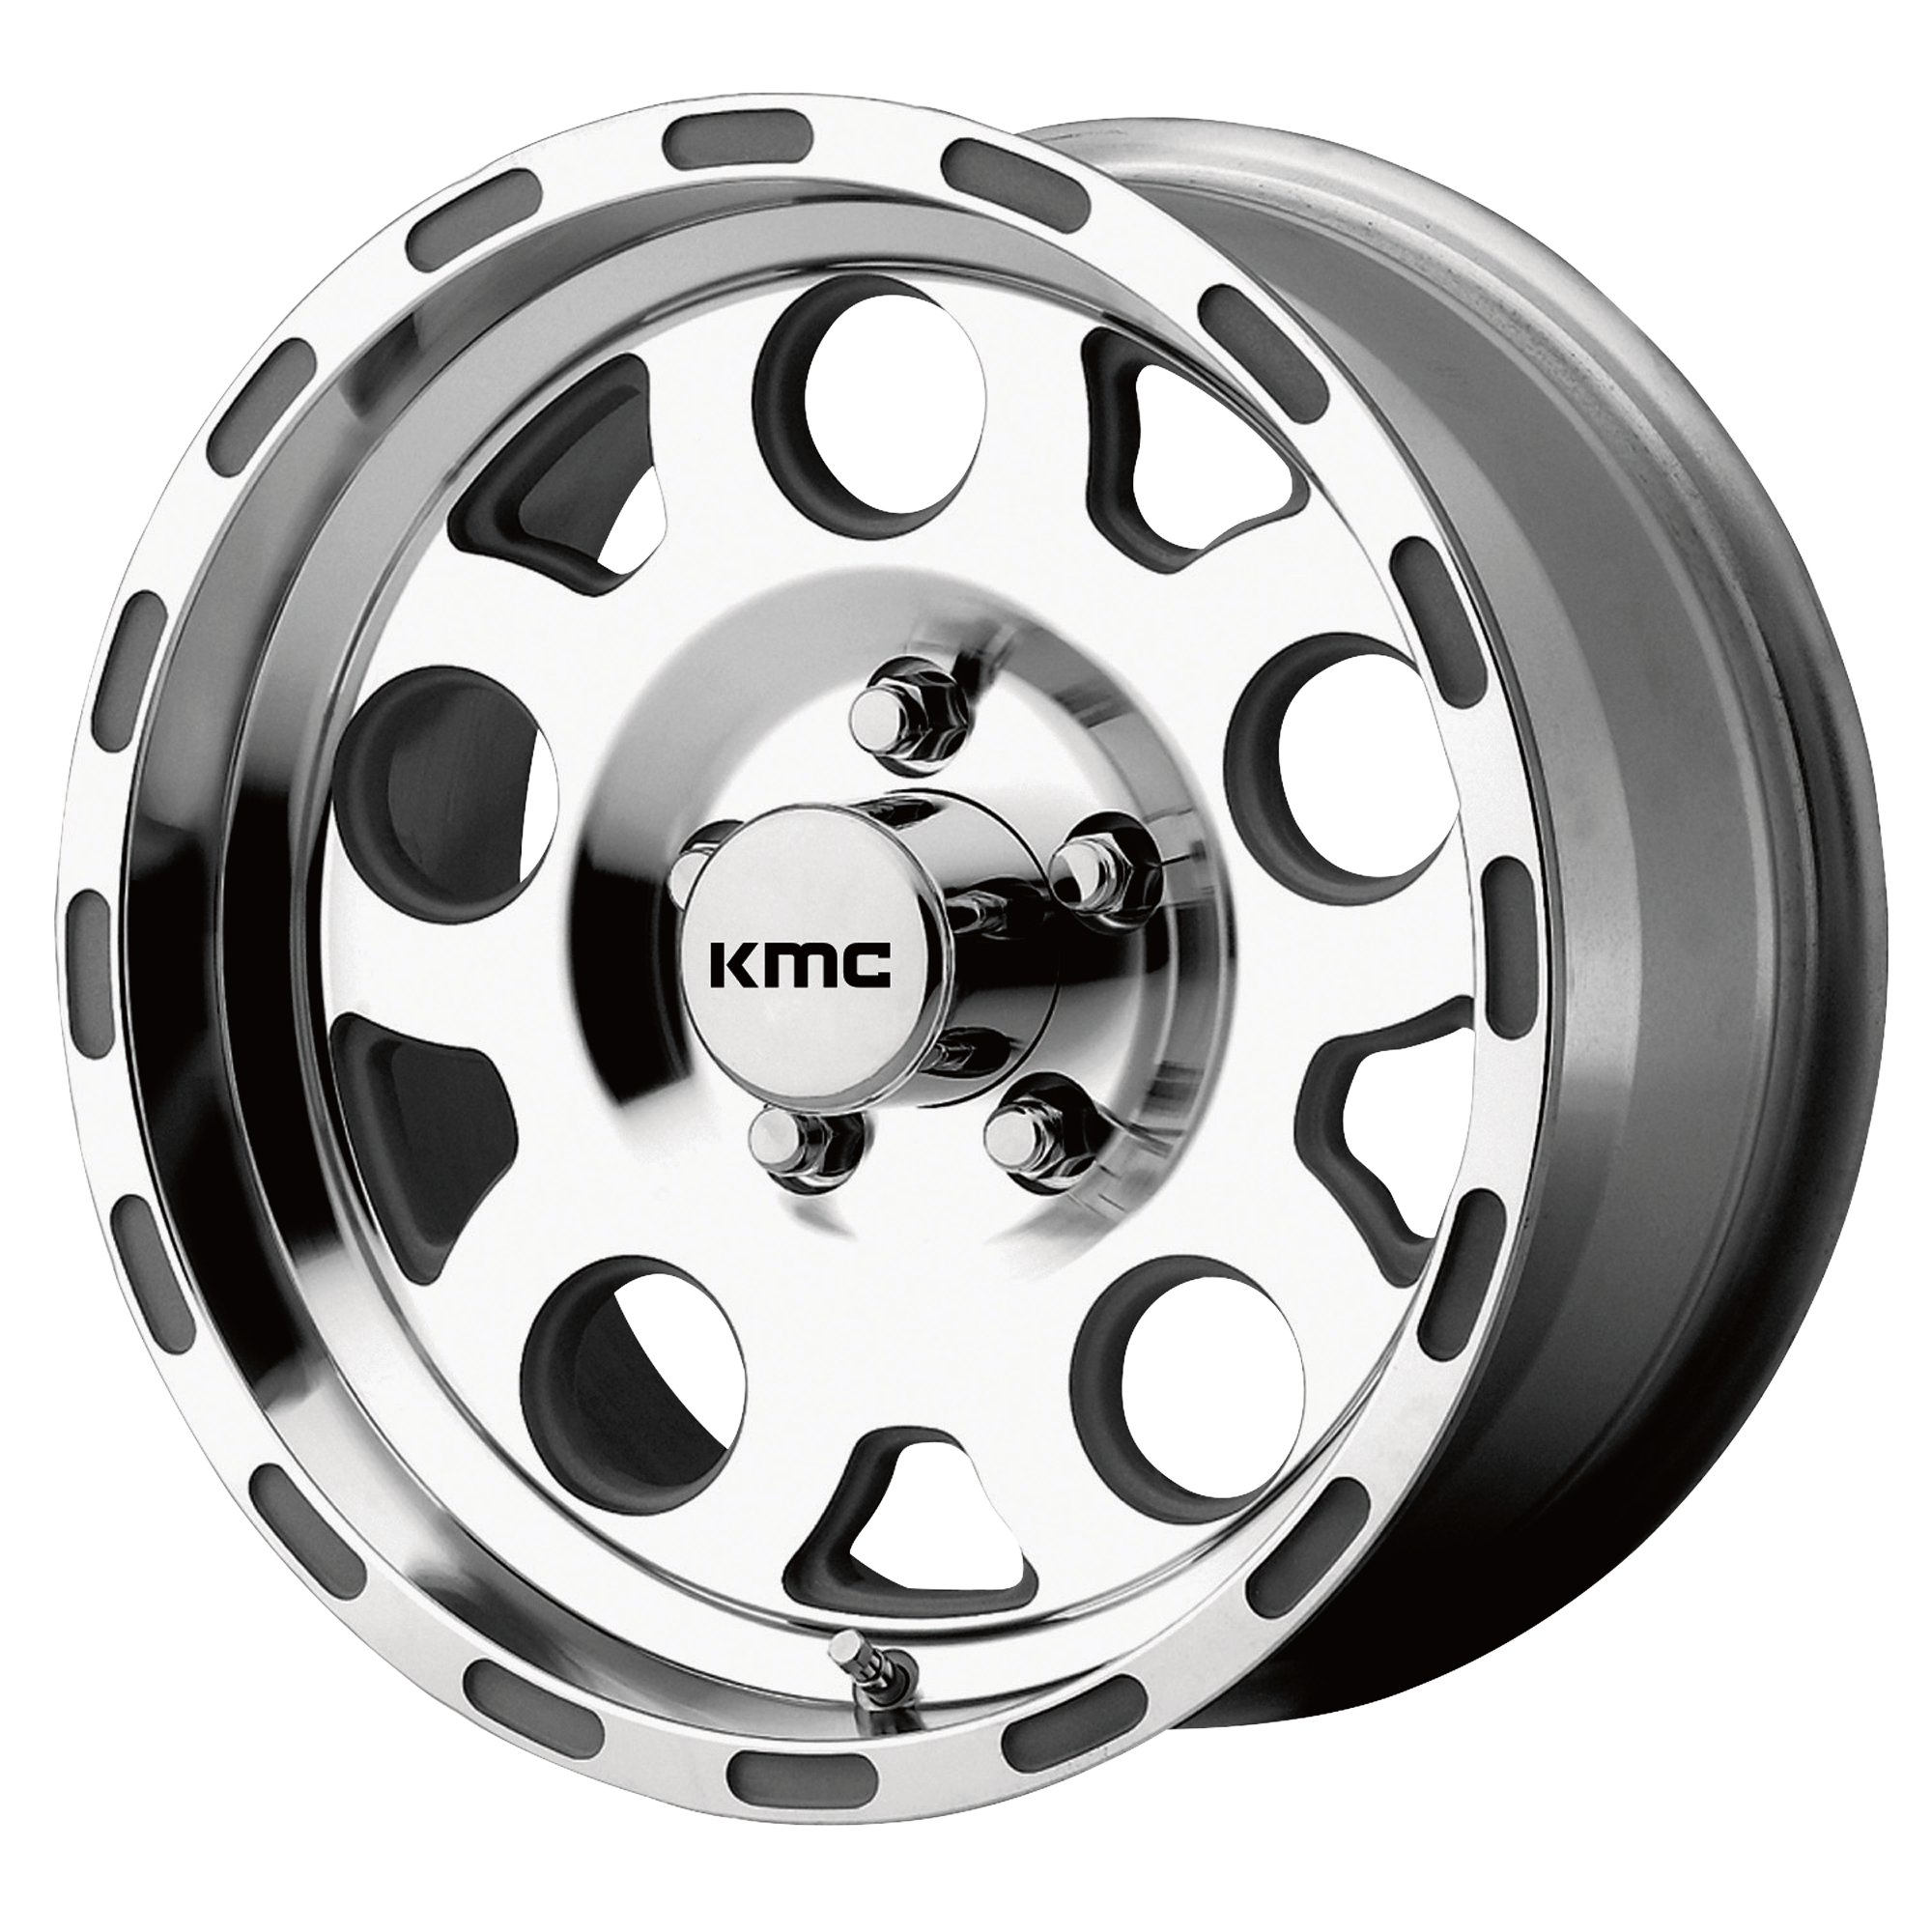 ENDURO 16x8 6x139.70 MACHINED W/ CLEAR COAT (0 mm) - Tires and Engine Performance